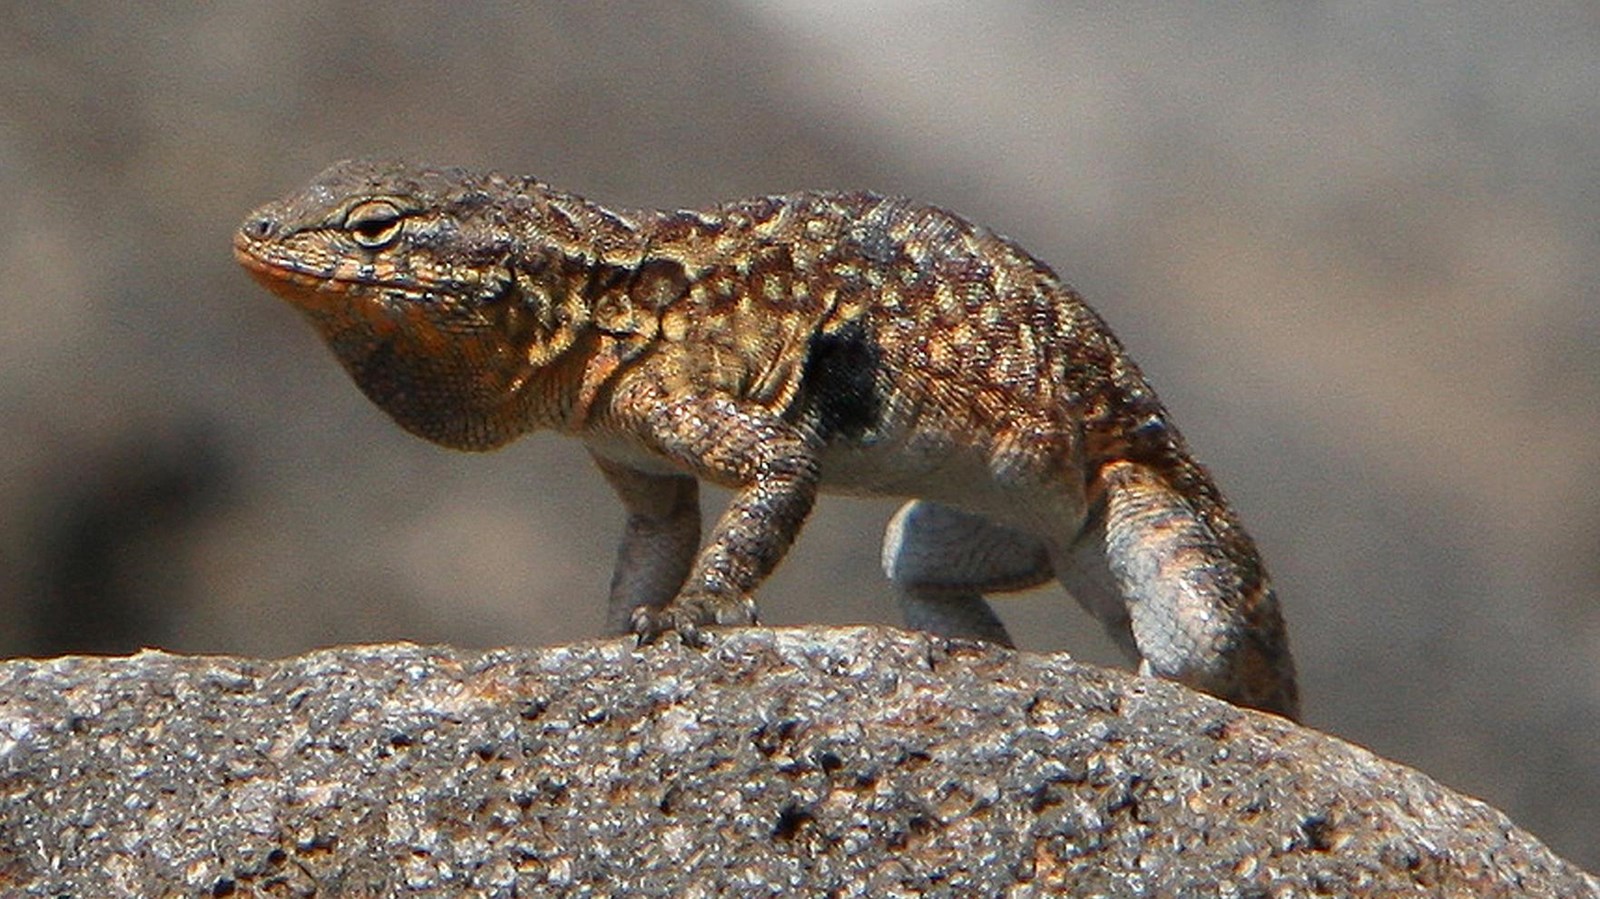 yellow and brown lizard on rock